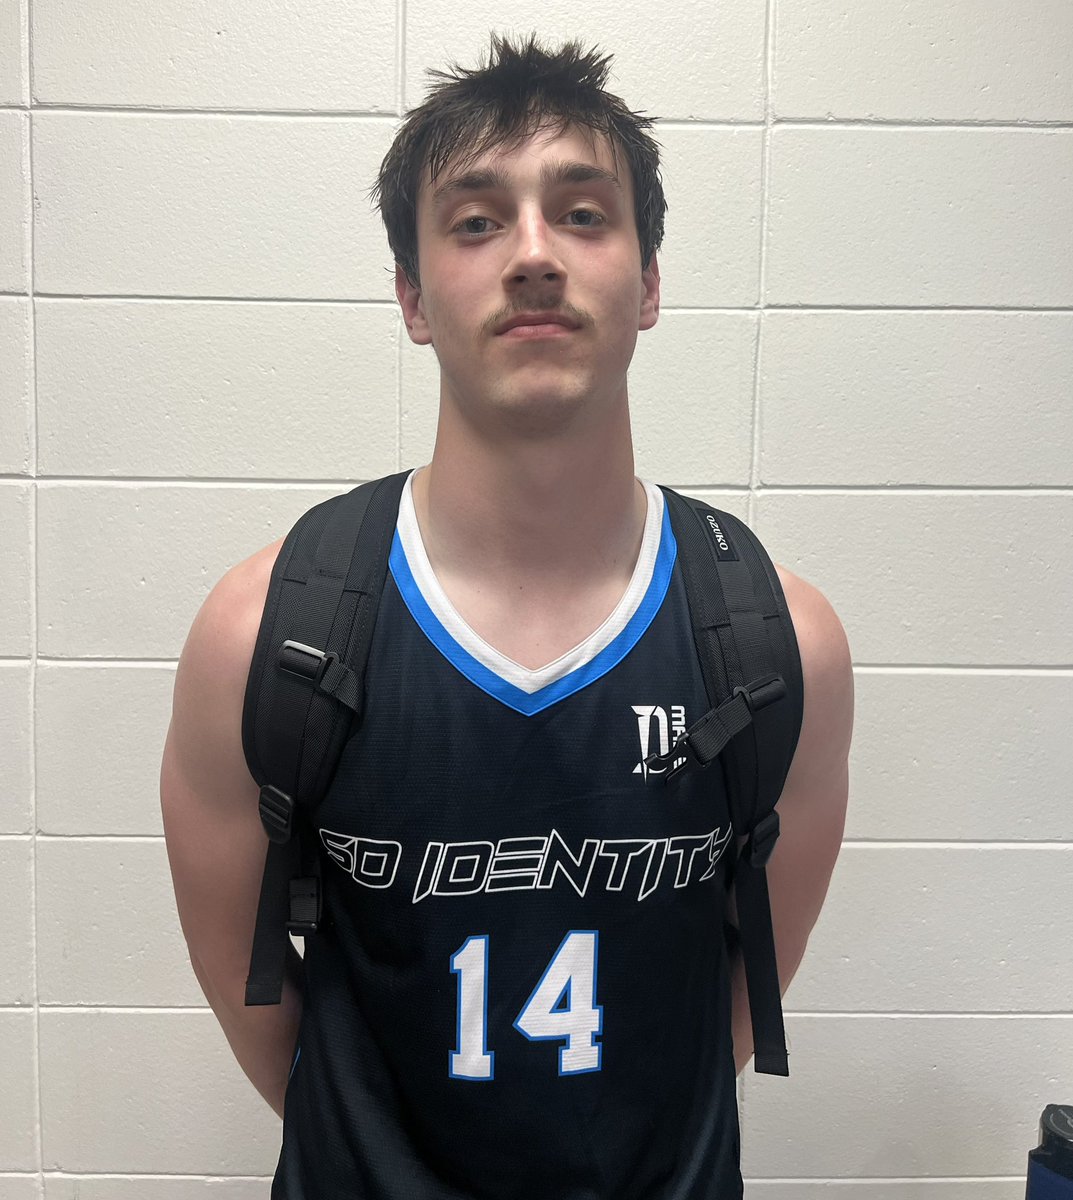 Maverick Nelson from @SD_Identity performed well this evening @PHCircuit Finished with 19 pts & 9 rbs, proved once again he is a sniper🎯, has added muscle & is now a 3level scorer & a quality athlete! The Cossacks have a serious baller! @CoachVincent2 #PHBATL @MavNelson11